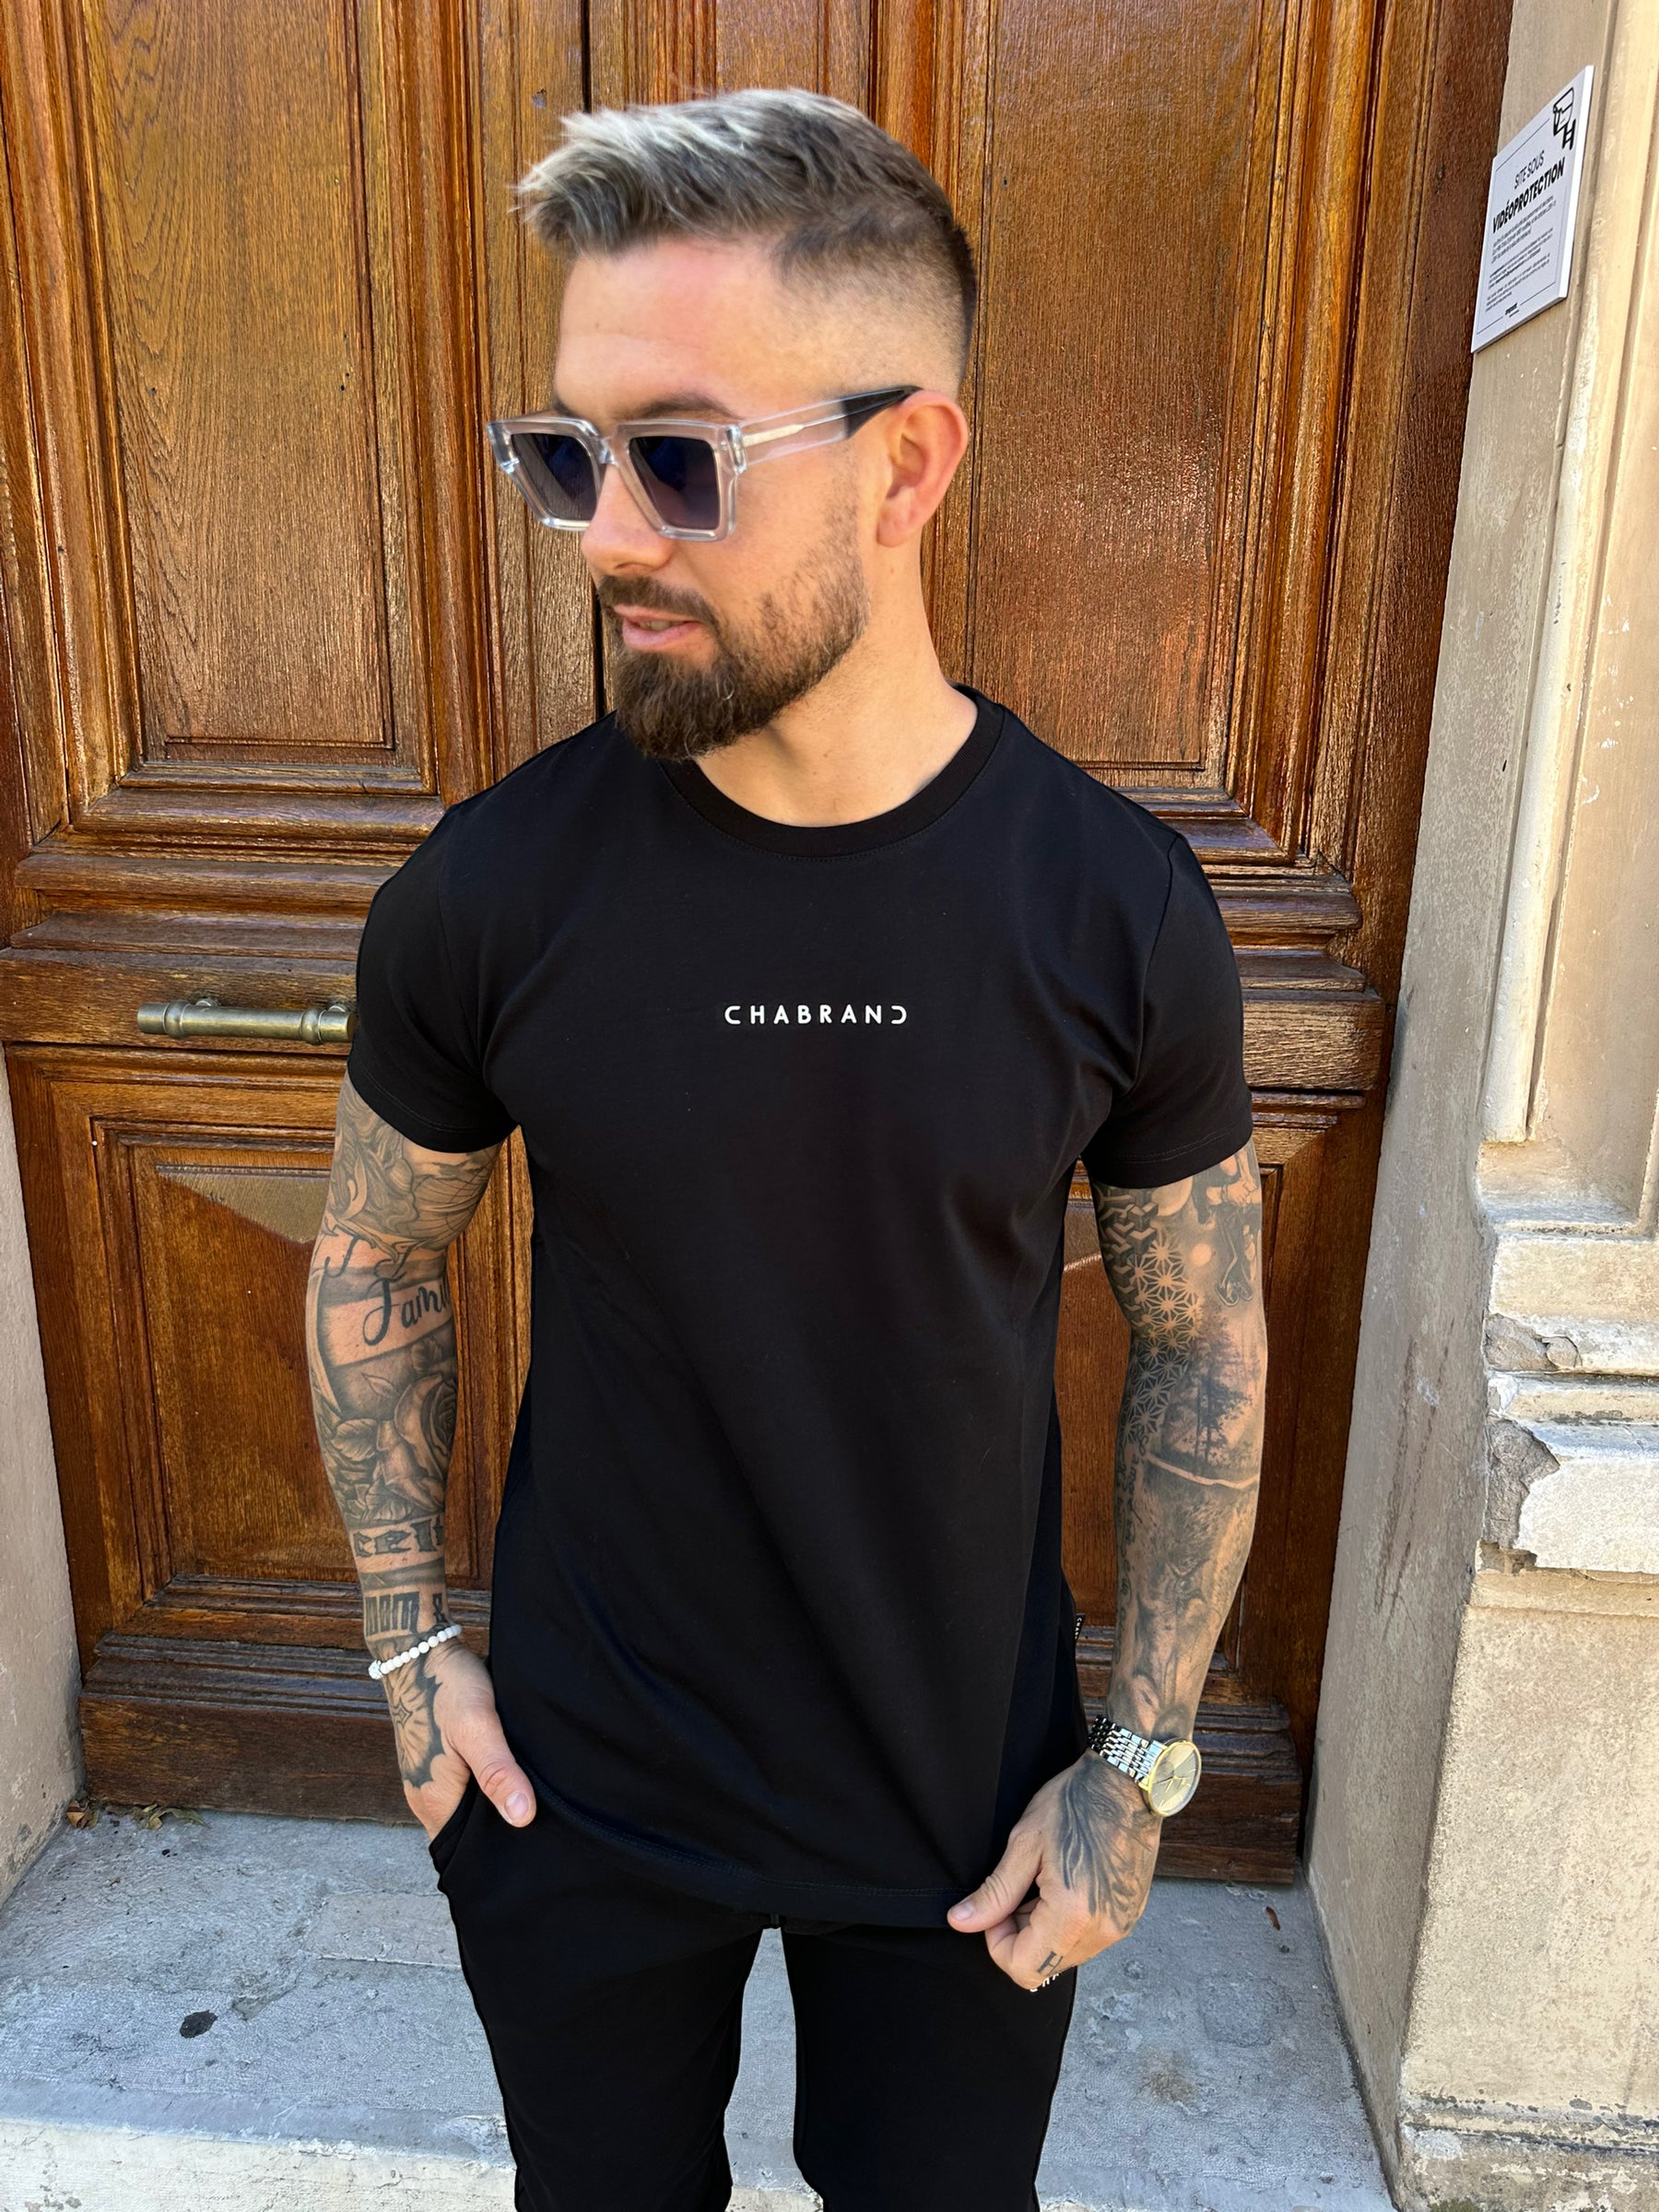 CHABRAND - Black t-shirt with mini white sign